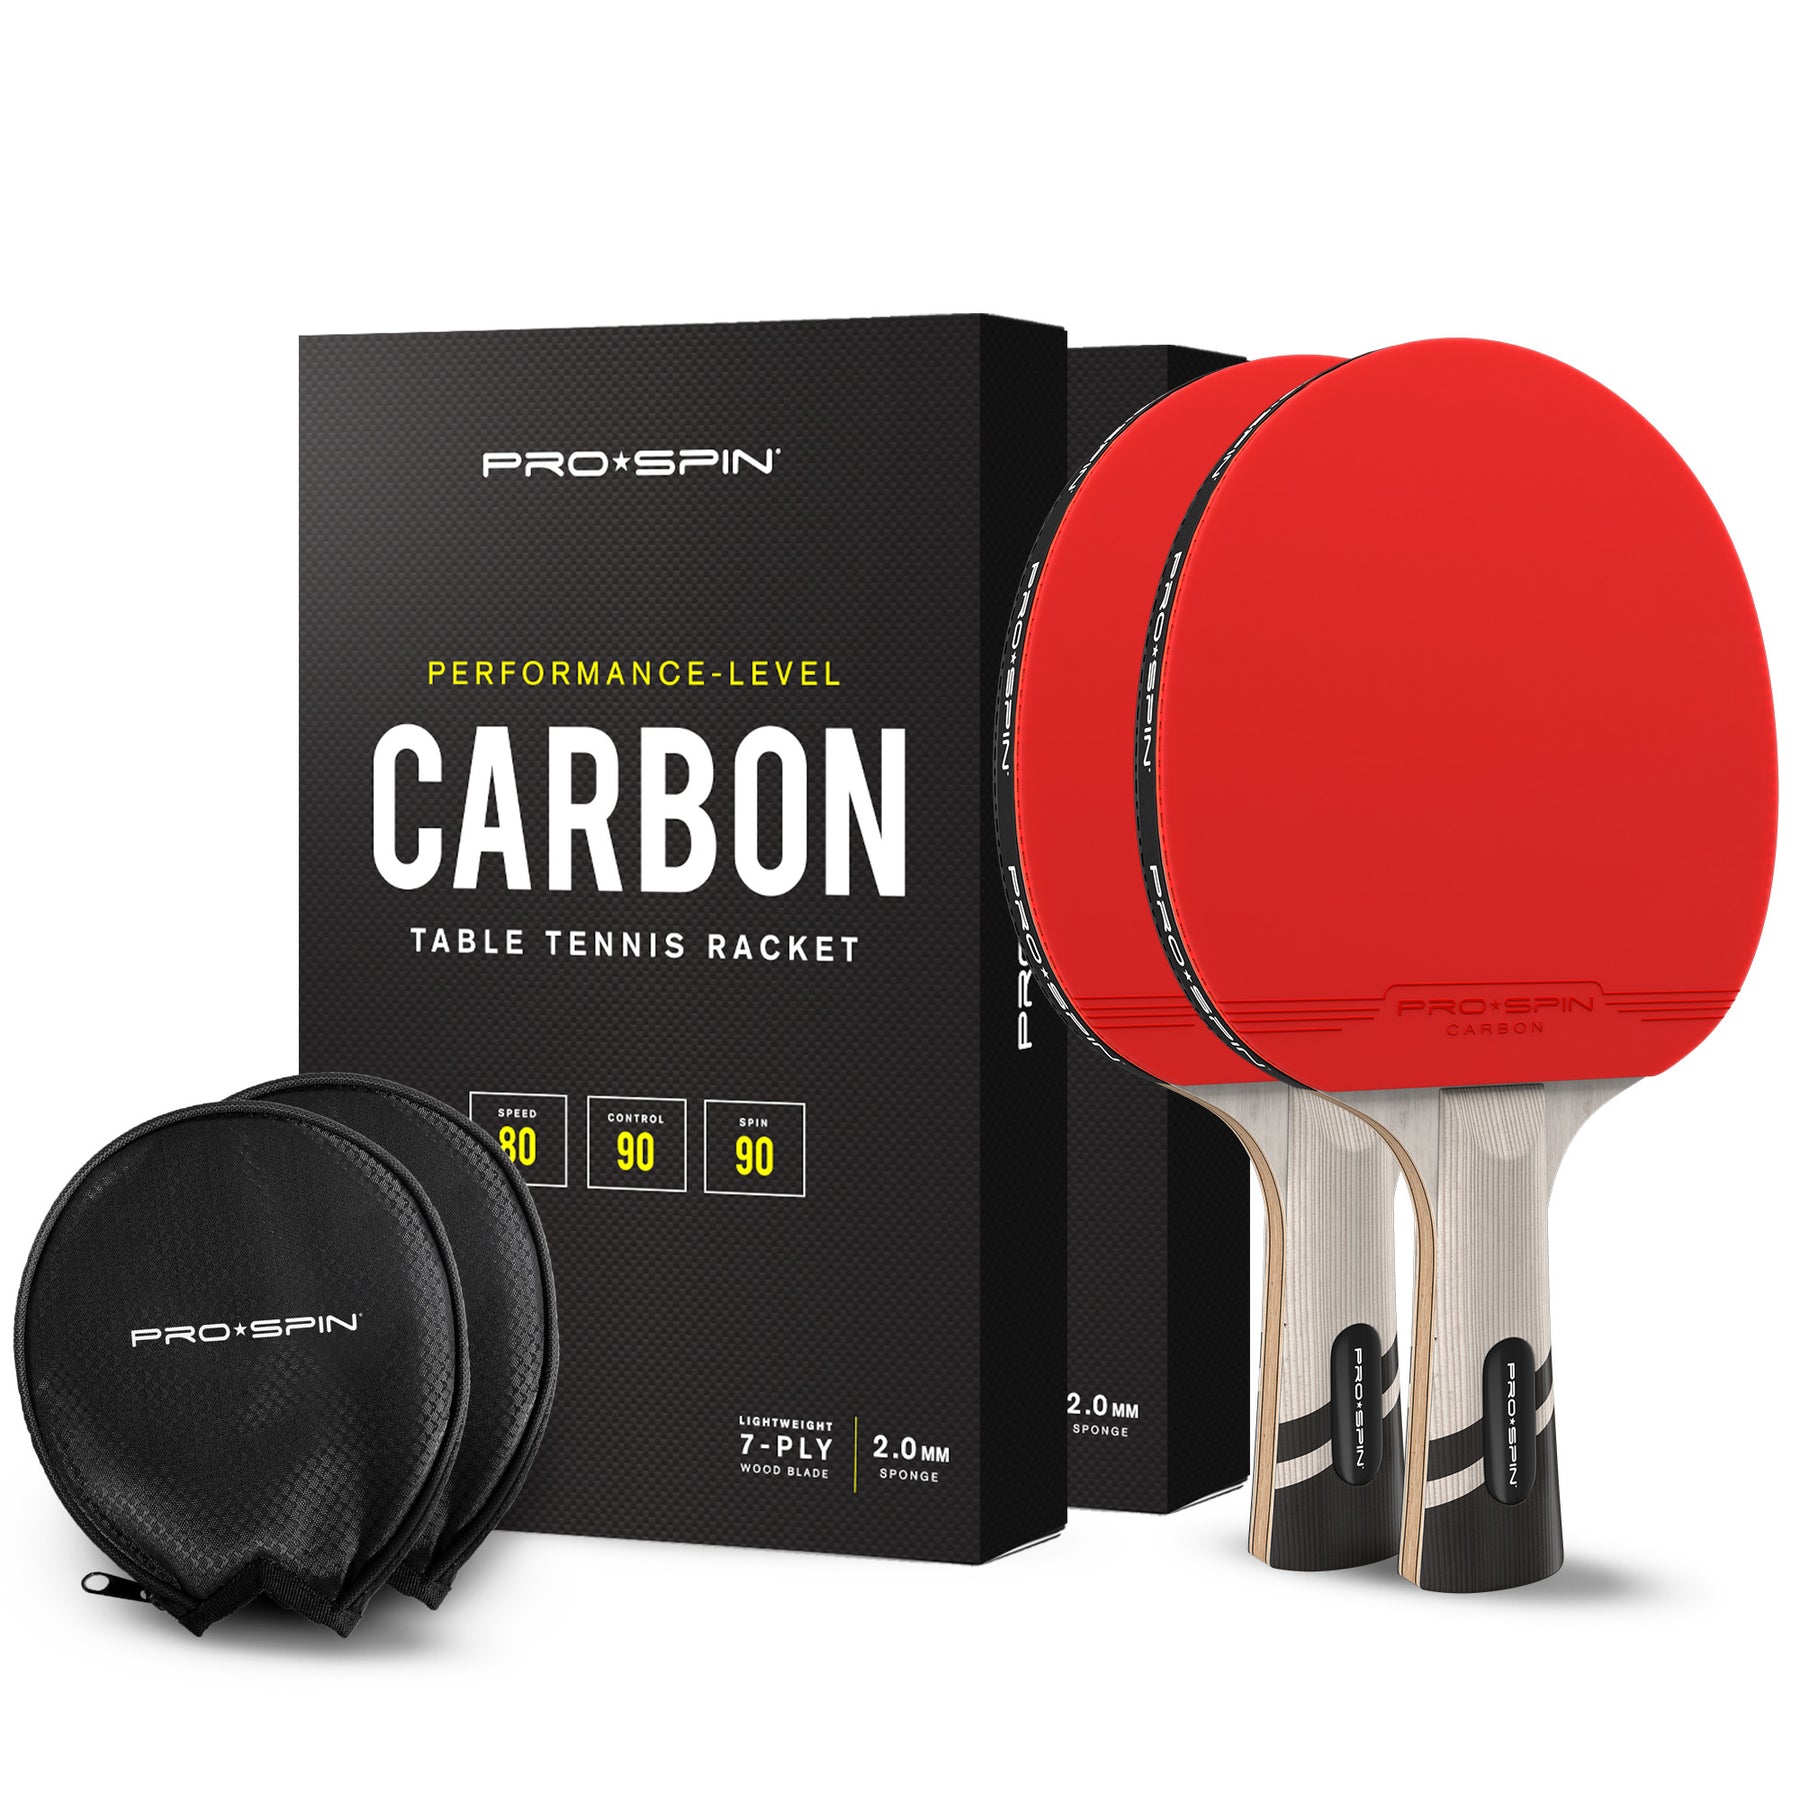 Carbon Ping Pong Paddle Elite Series Table Tennis Racket With Case 1 Pack Shakehand Standard